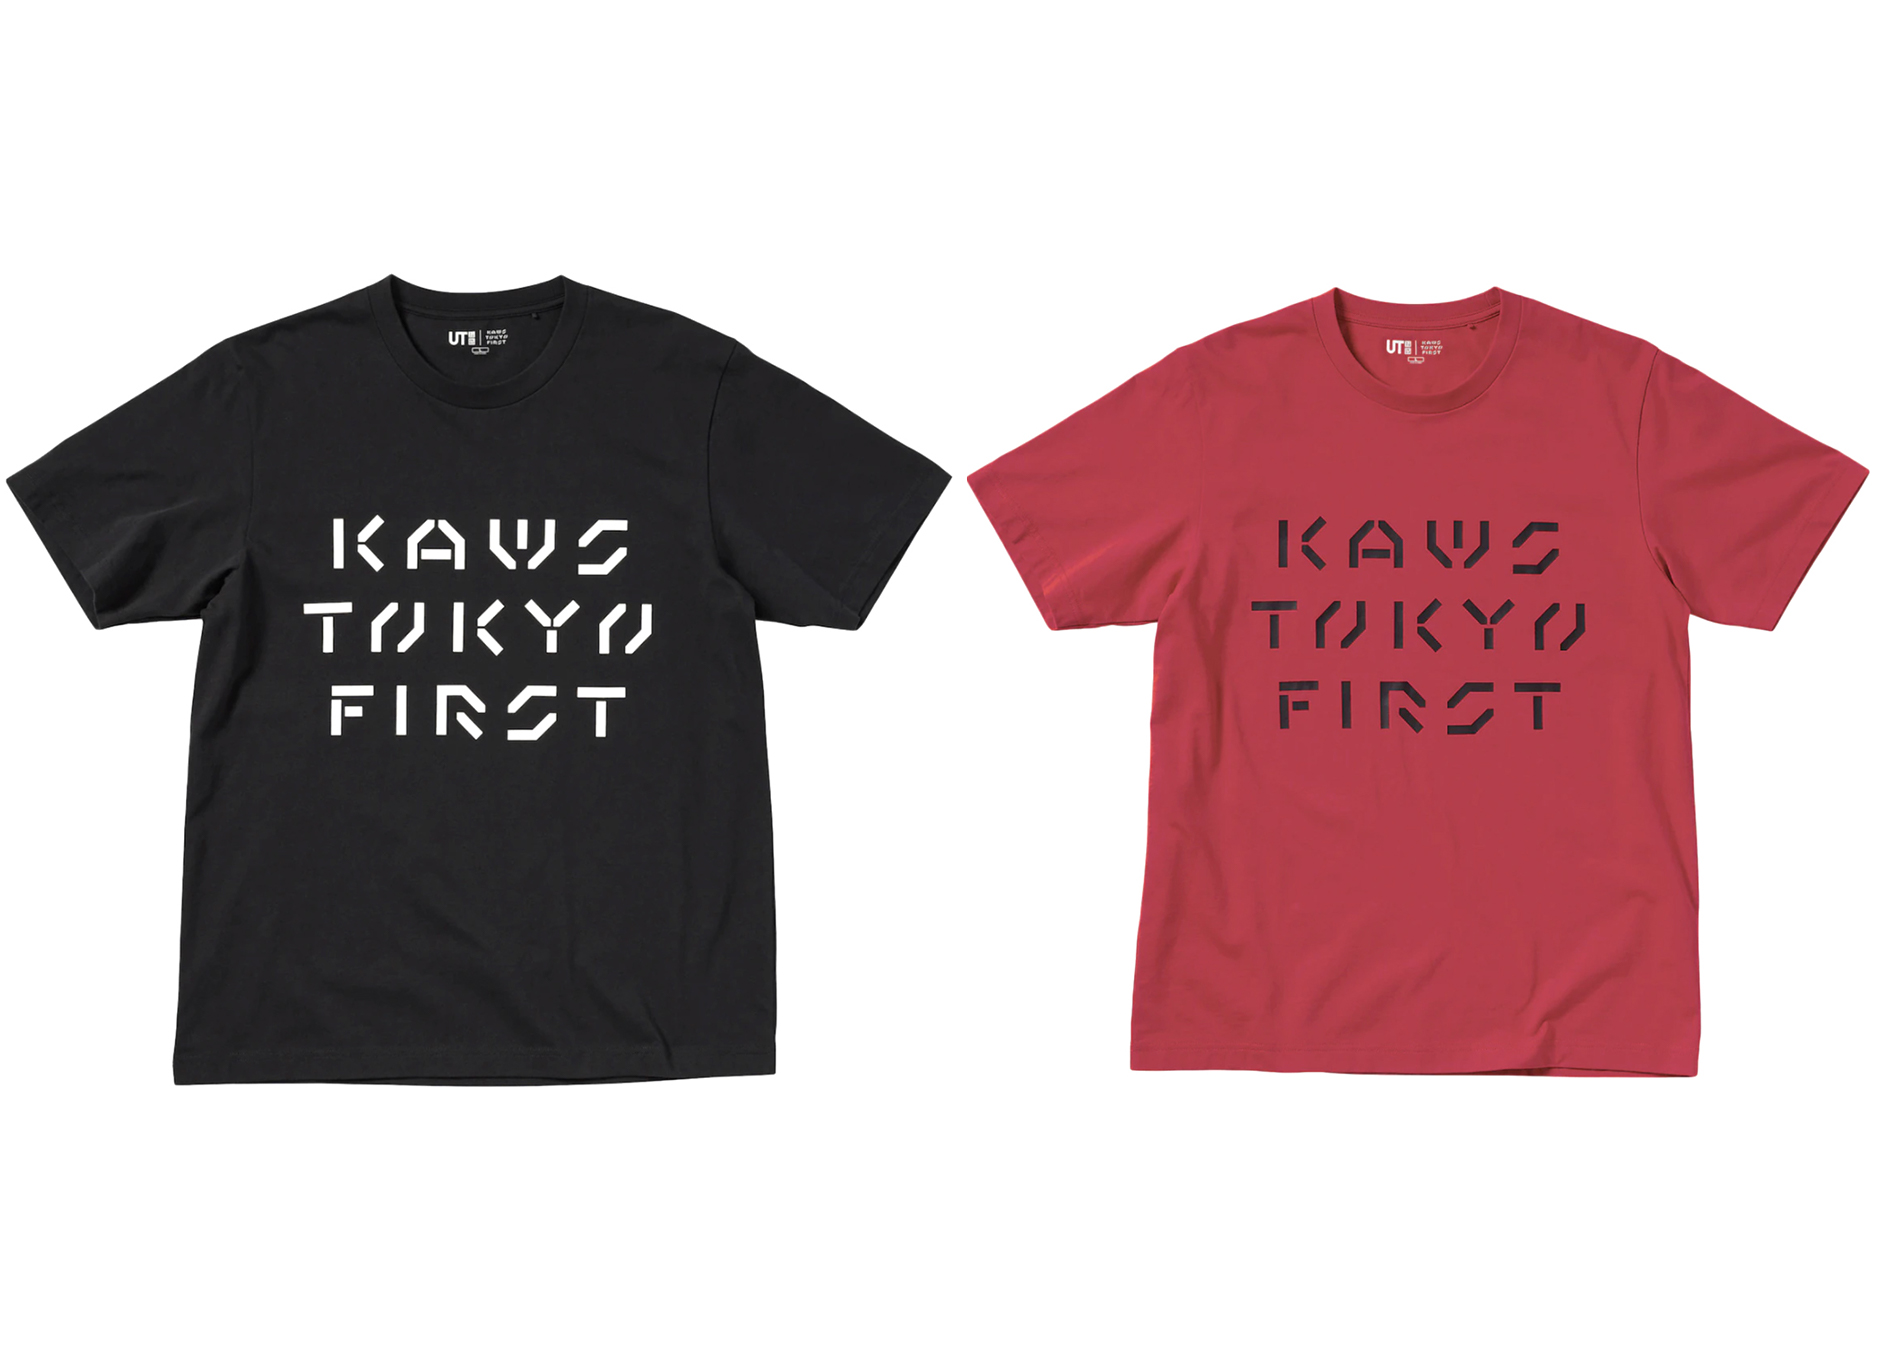 Uniqlo KAWS x Uniqlo Tokyo First Tee SS21  Seperated  Grailed